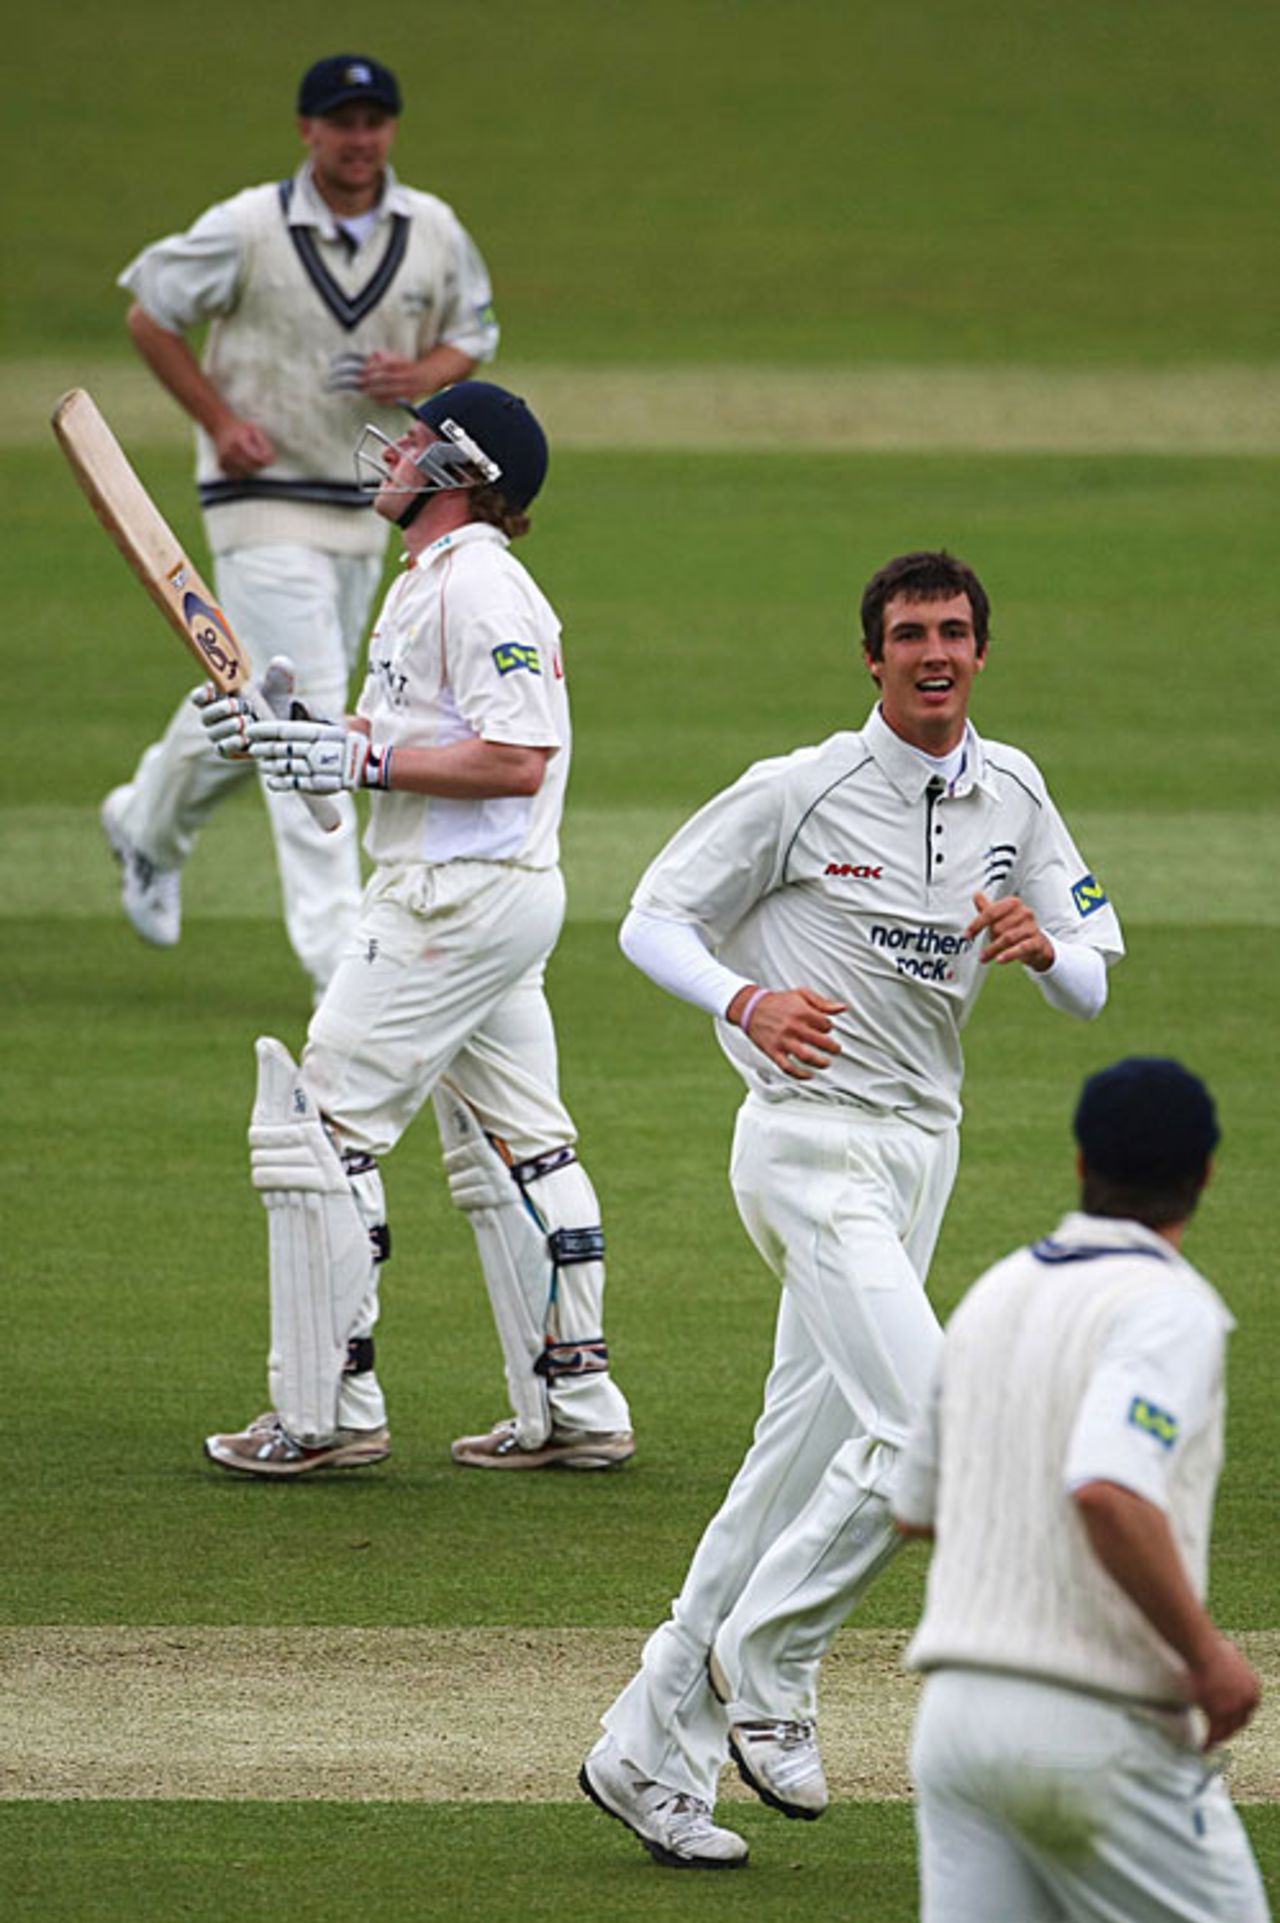 Jamie Dalrymple is aghast after mis-hooking Steven Finn to fine leg, Middlesex v Glamorgan, County Championship, Lord's, April 25, 2008